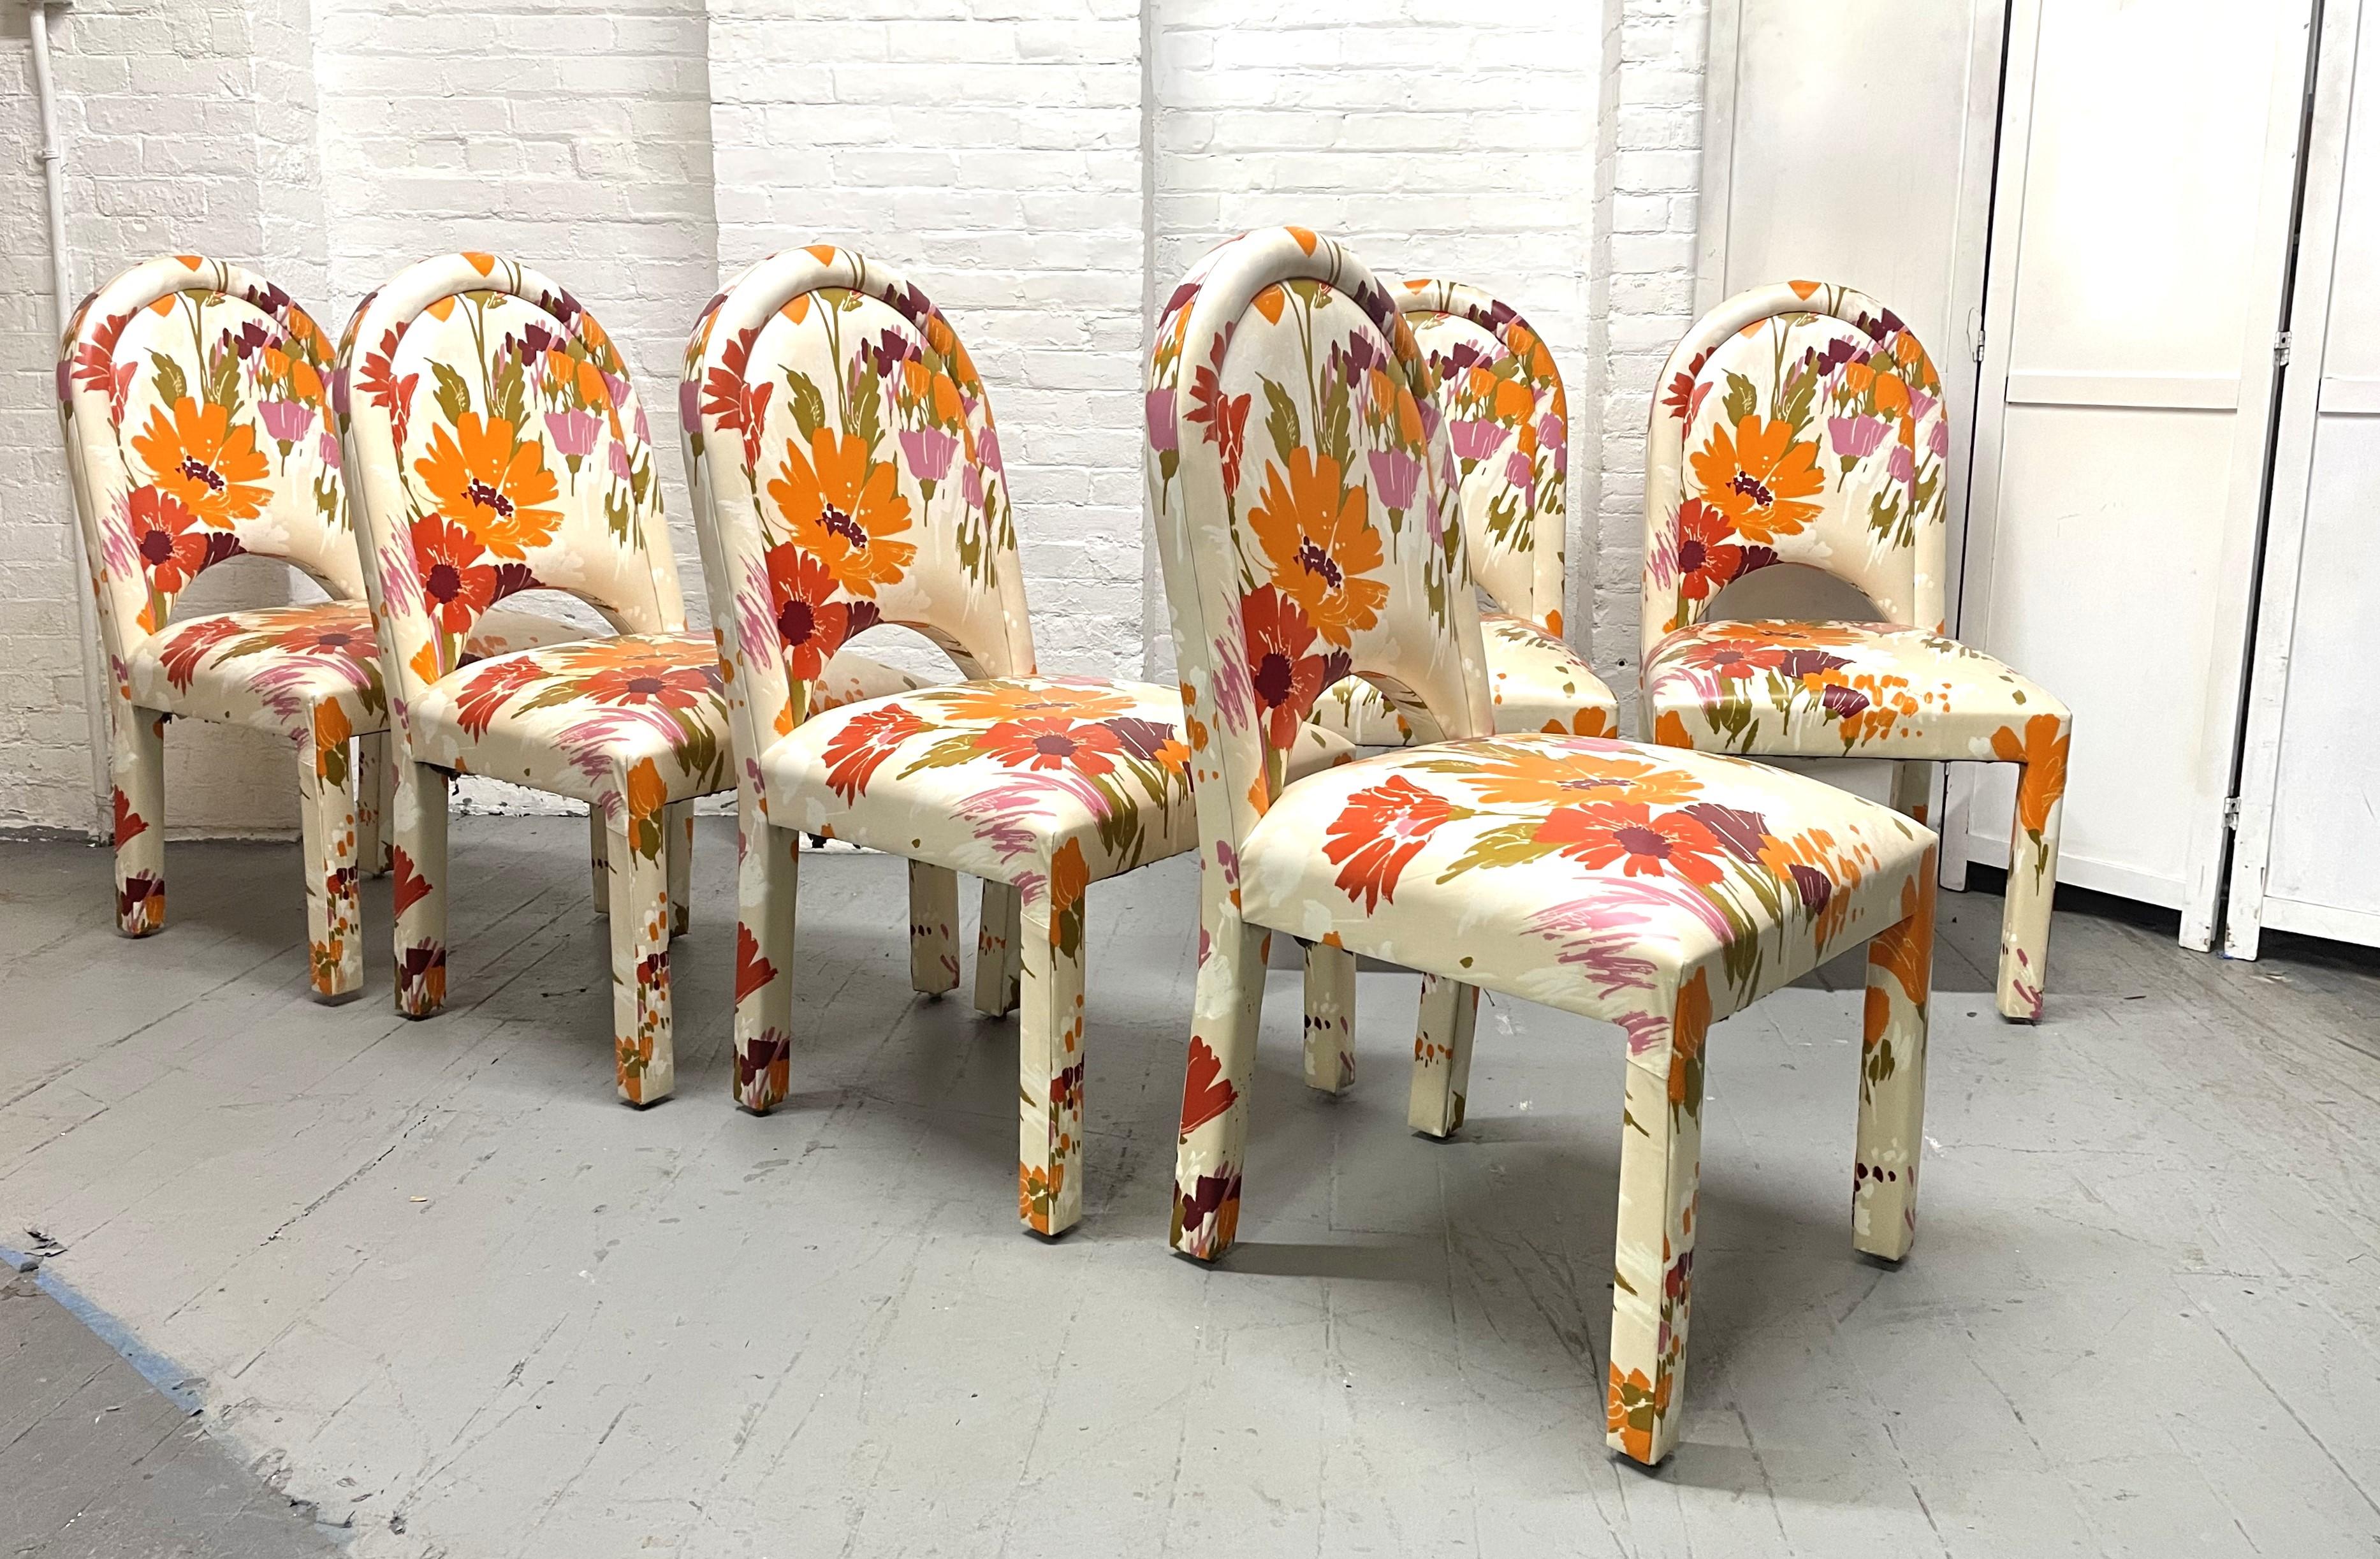 Set of 6 Mid-Century Modern Floral Upholstered Dining Chairs. Each chair is upholstered throughout in vinyl including around the legs and has an arched backrest.
